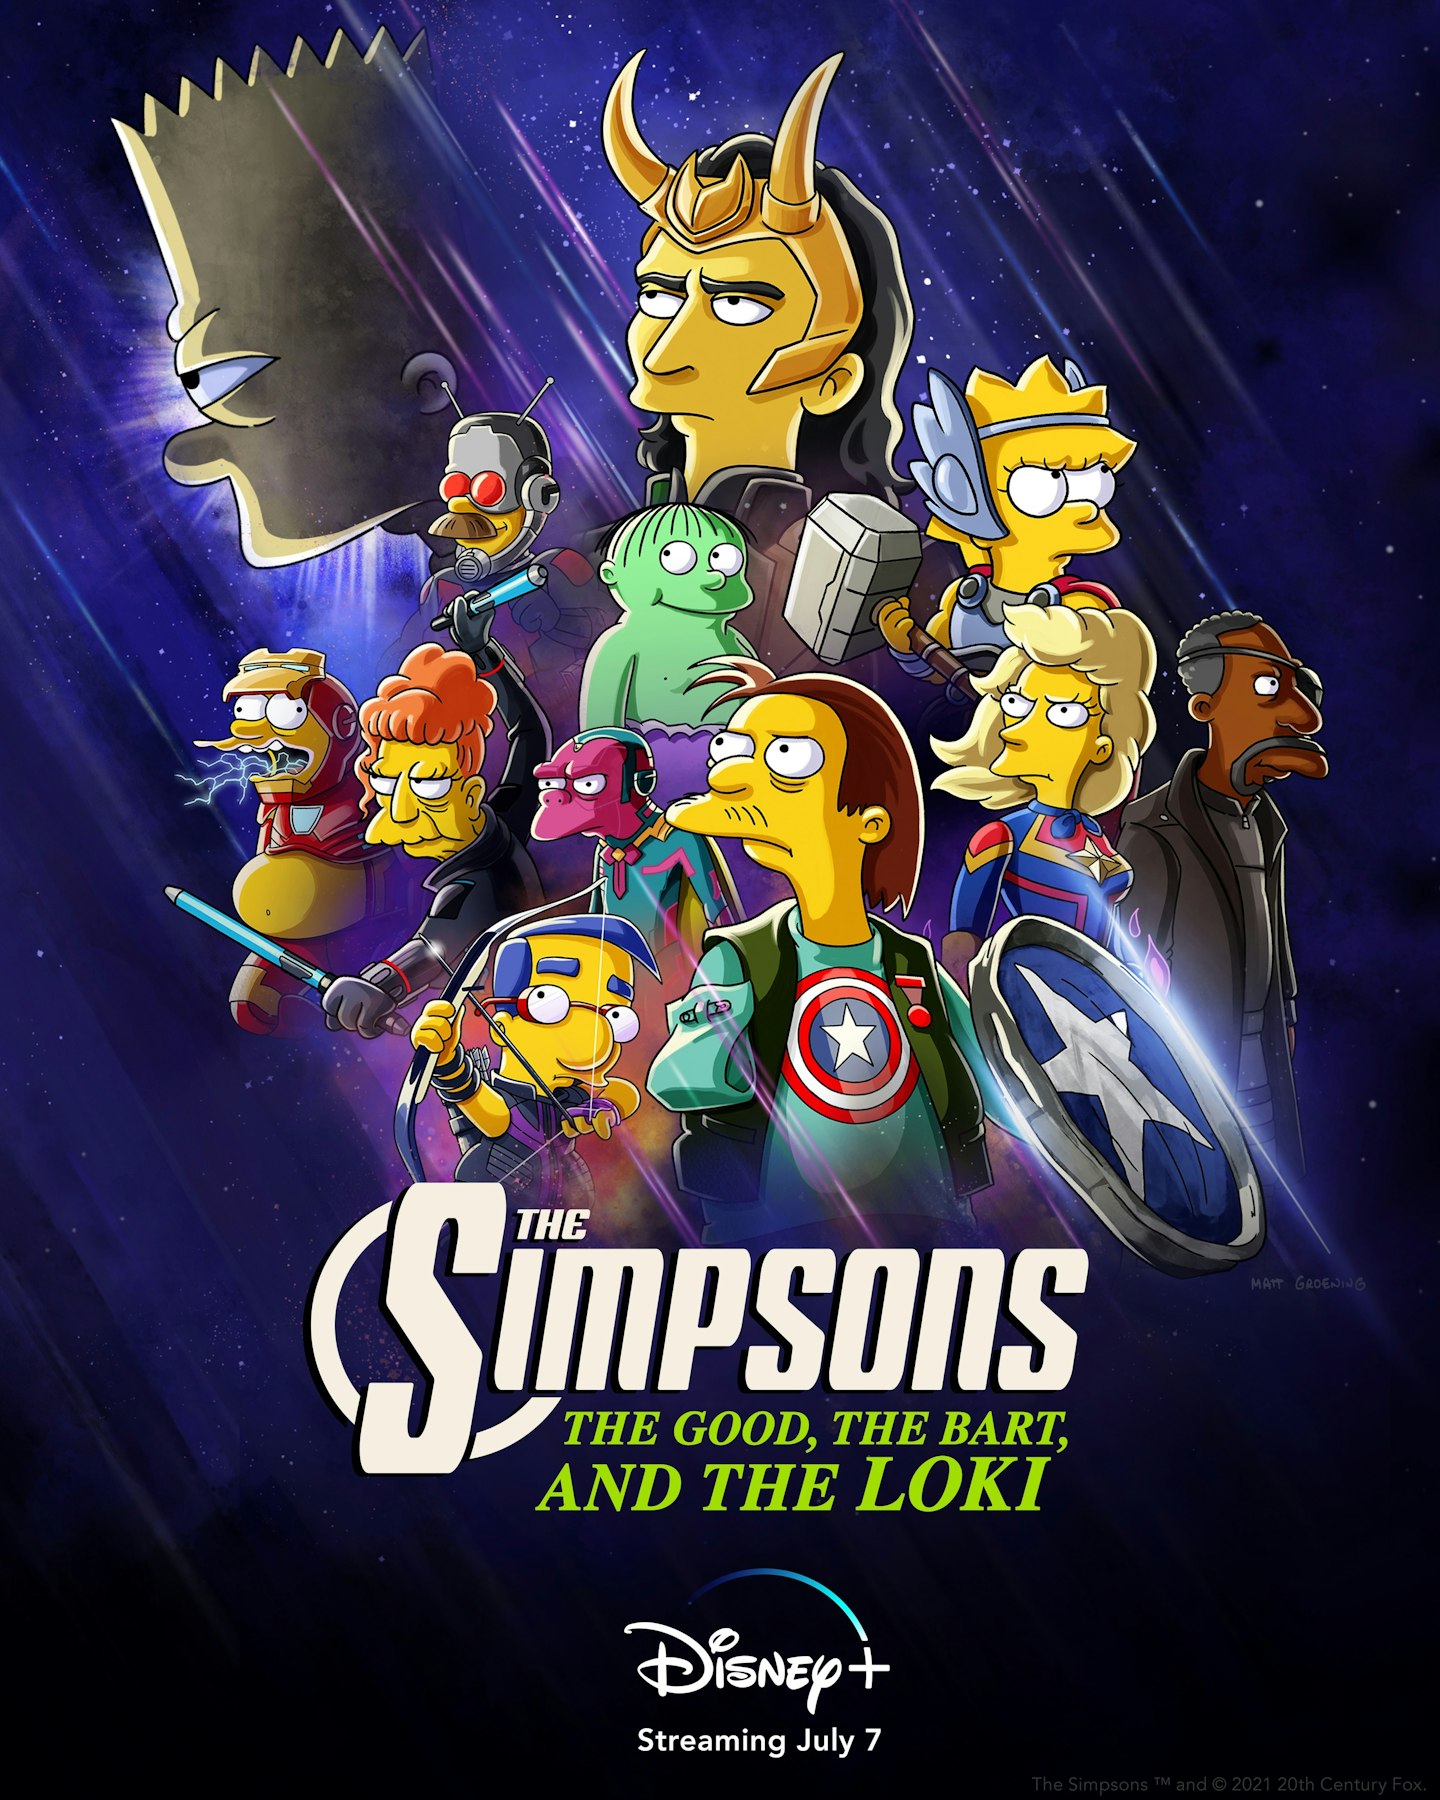 The Simpsons MCU short poster